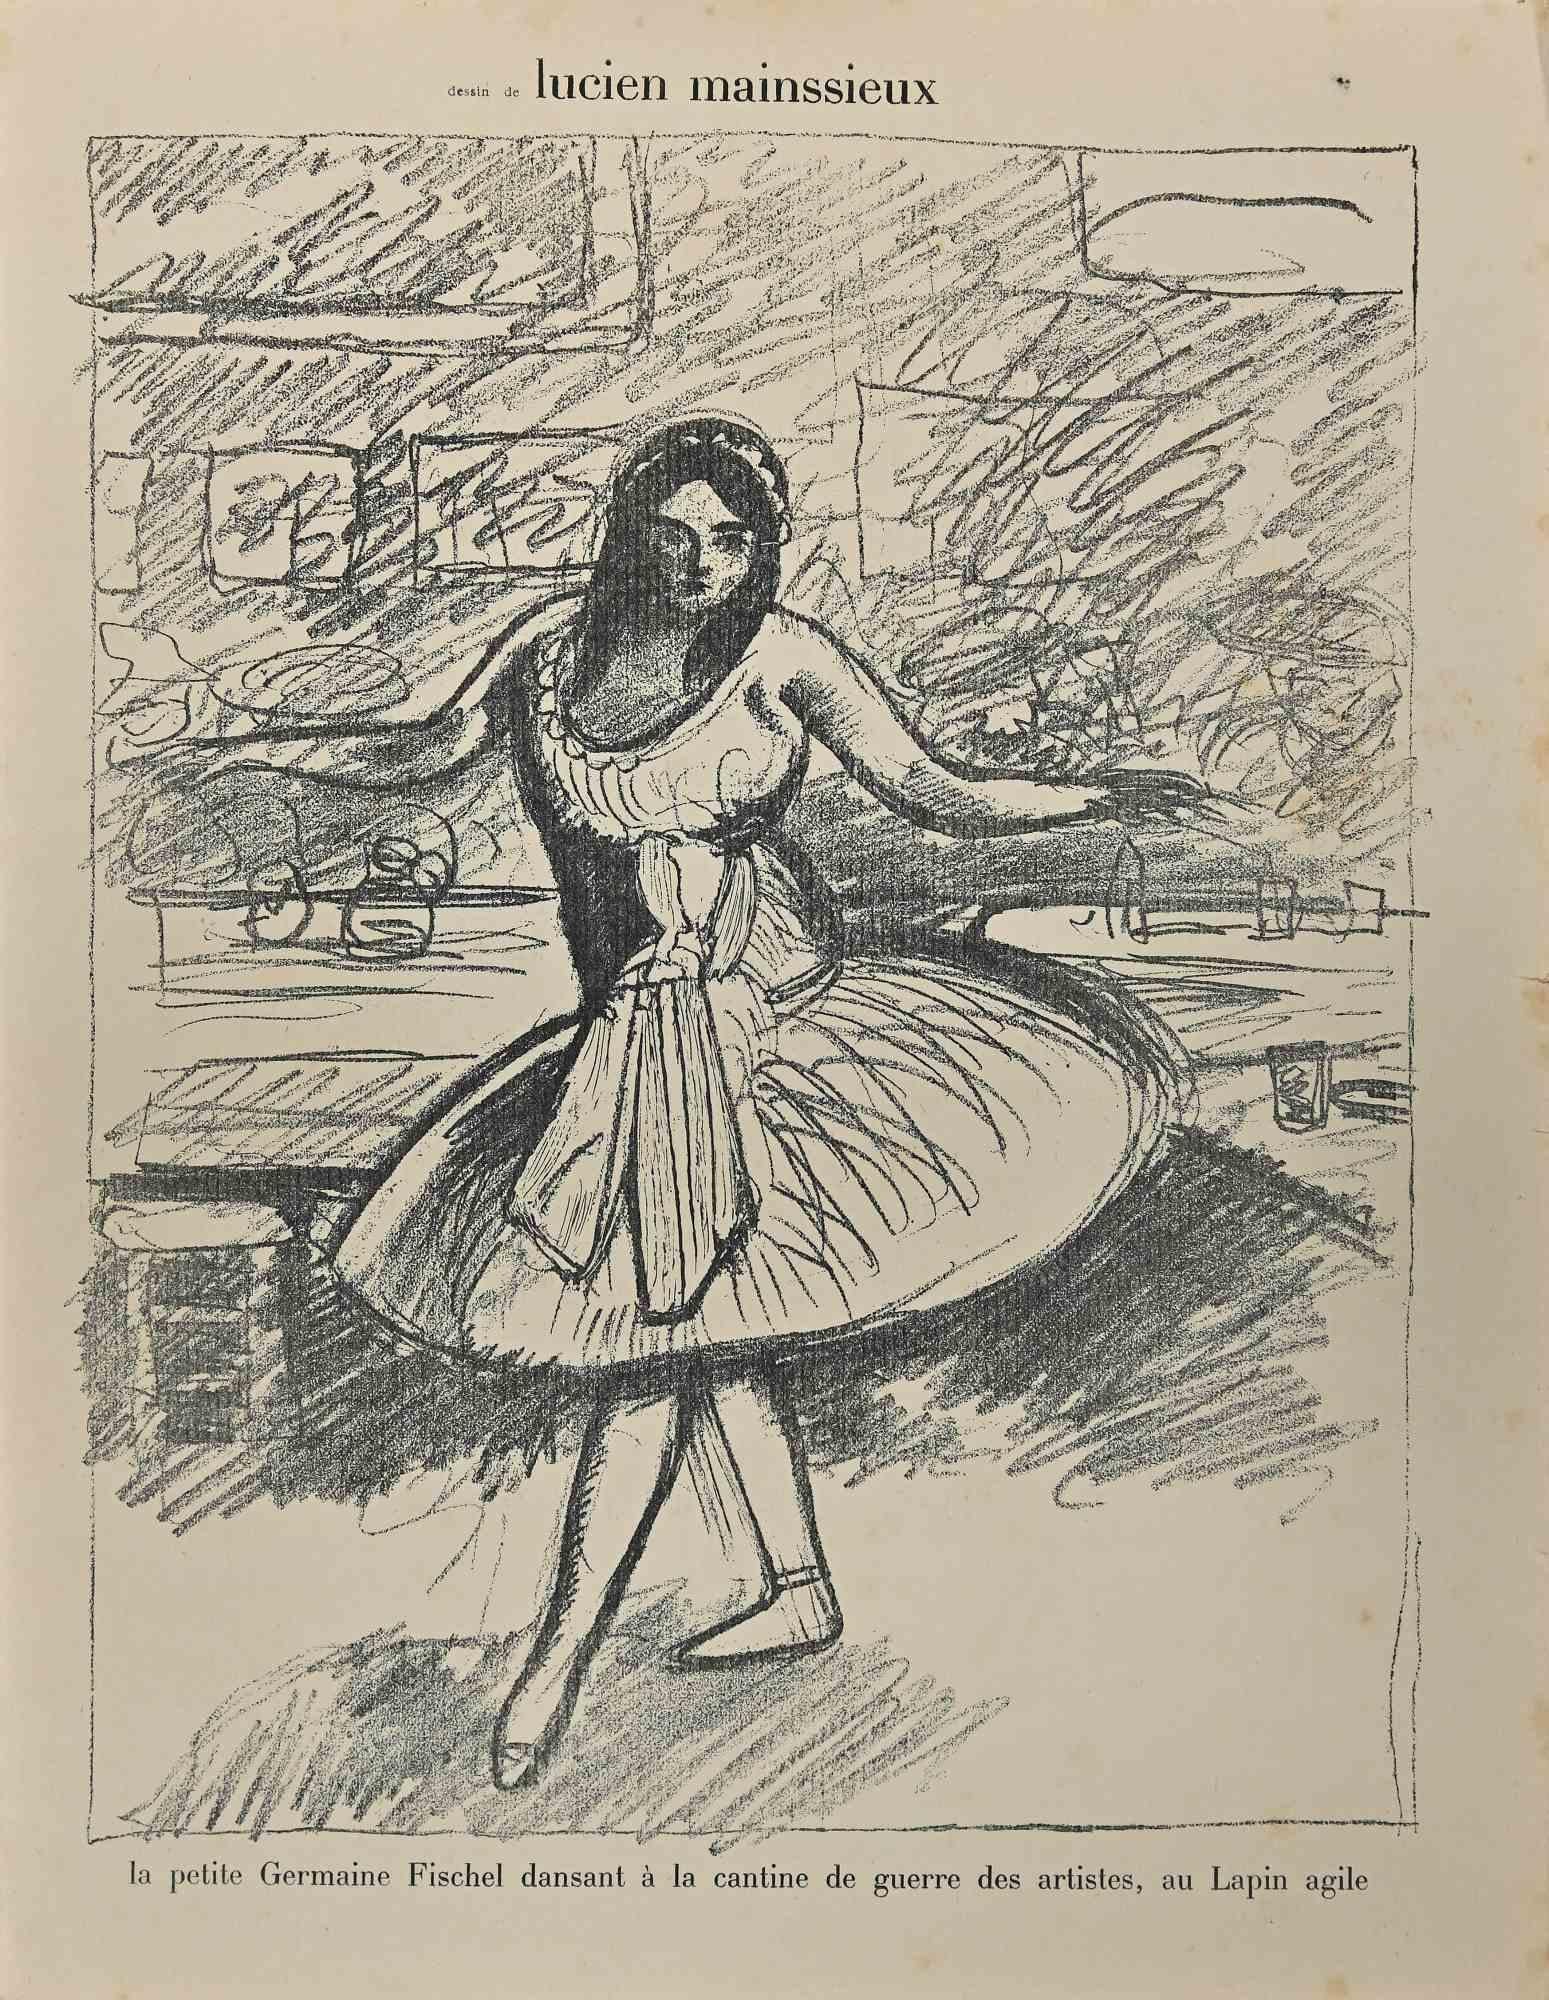 Dancer is an Original Lithograph realized by Lucien Mainssieux.

The artwork is in good condition on a yellowed paper.

Under the drawing there is a description of The little dancer Germaine Fischel dancing in the war artist's cellar.

On the back